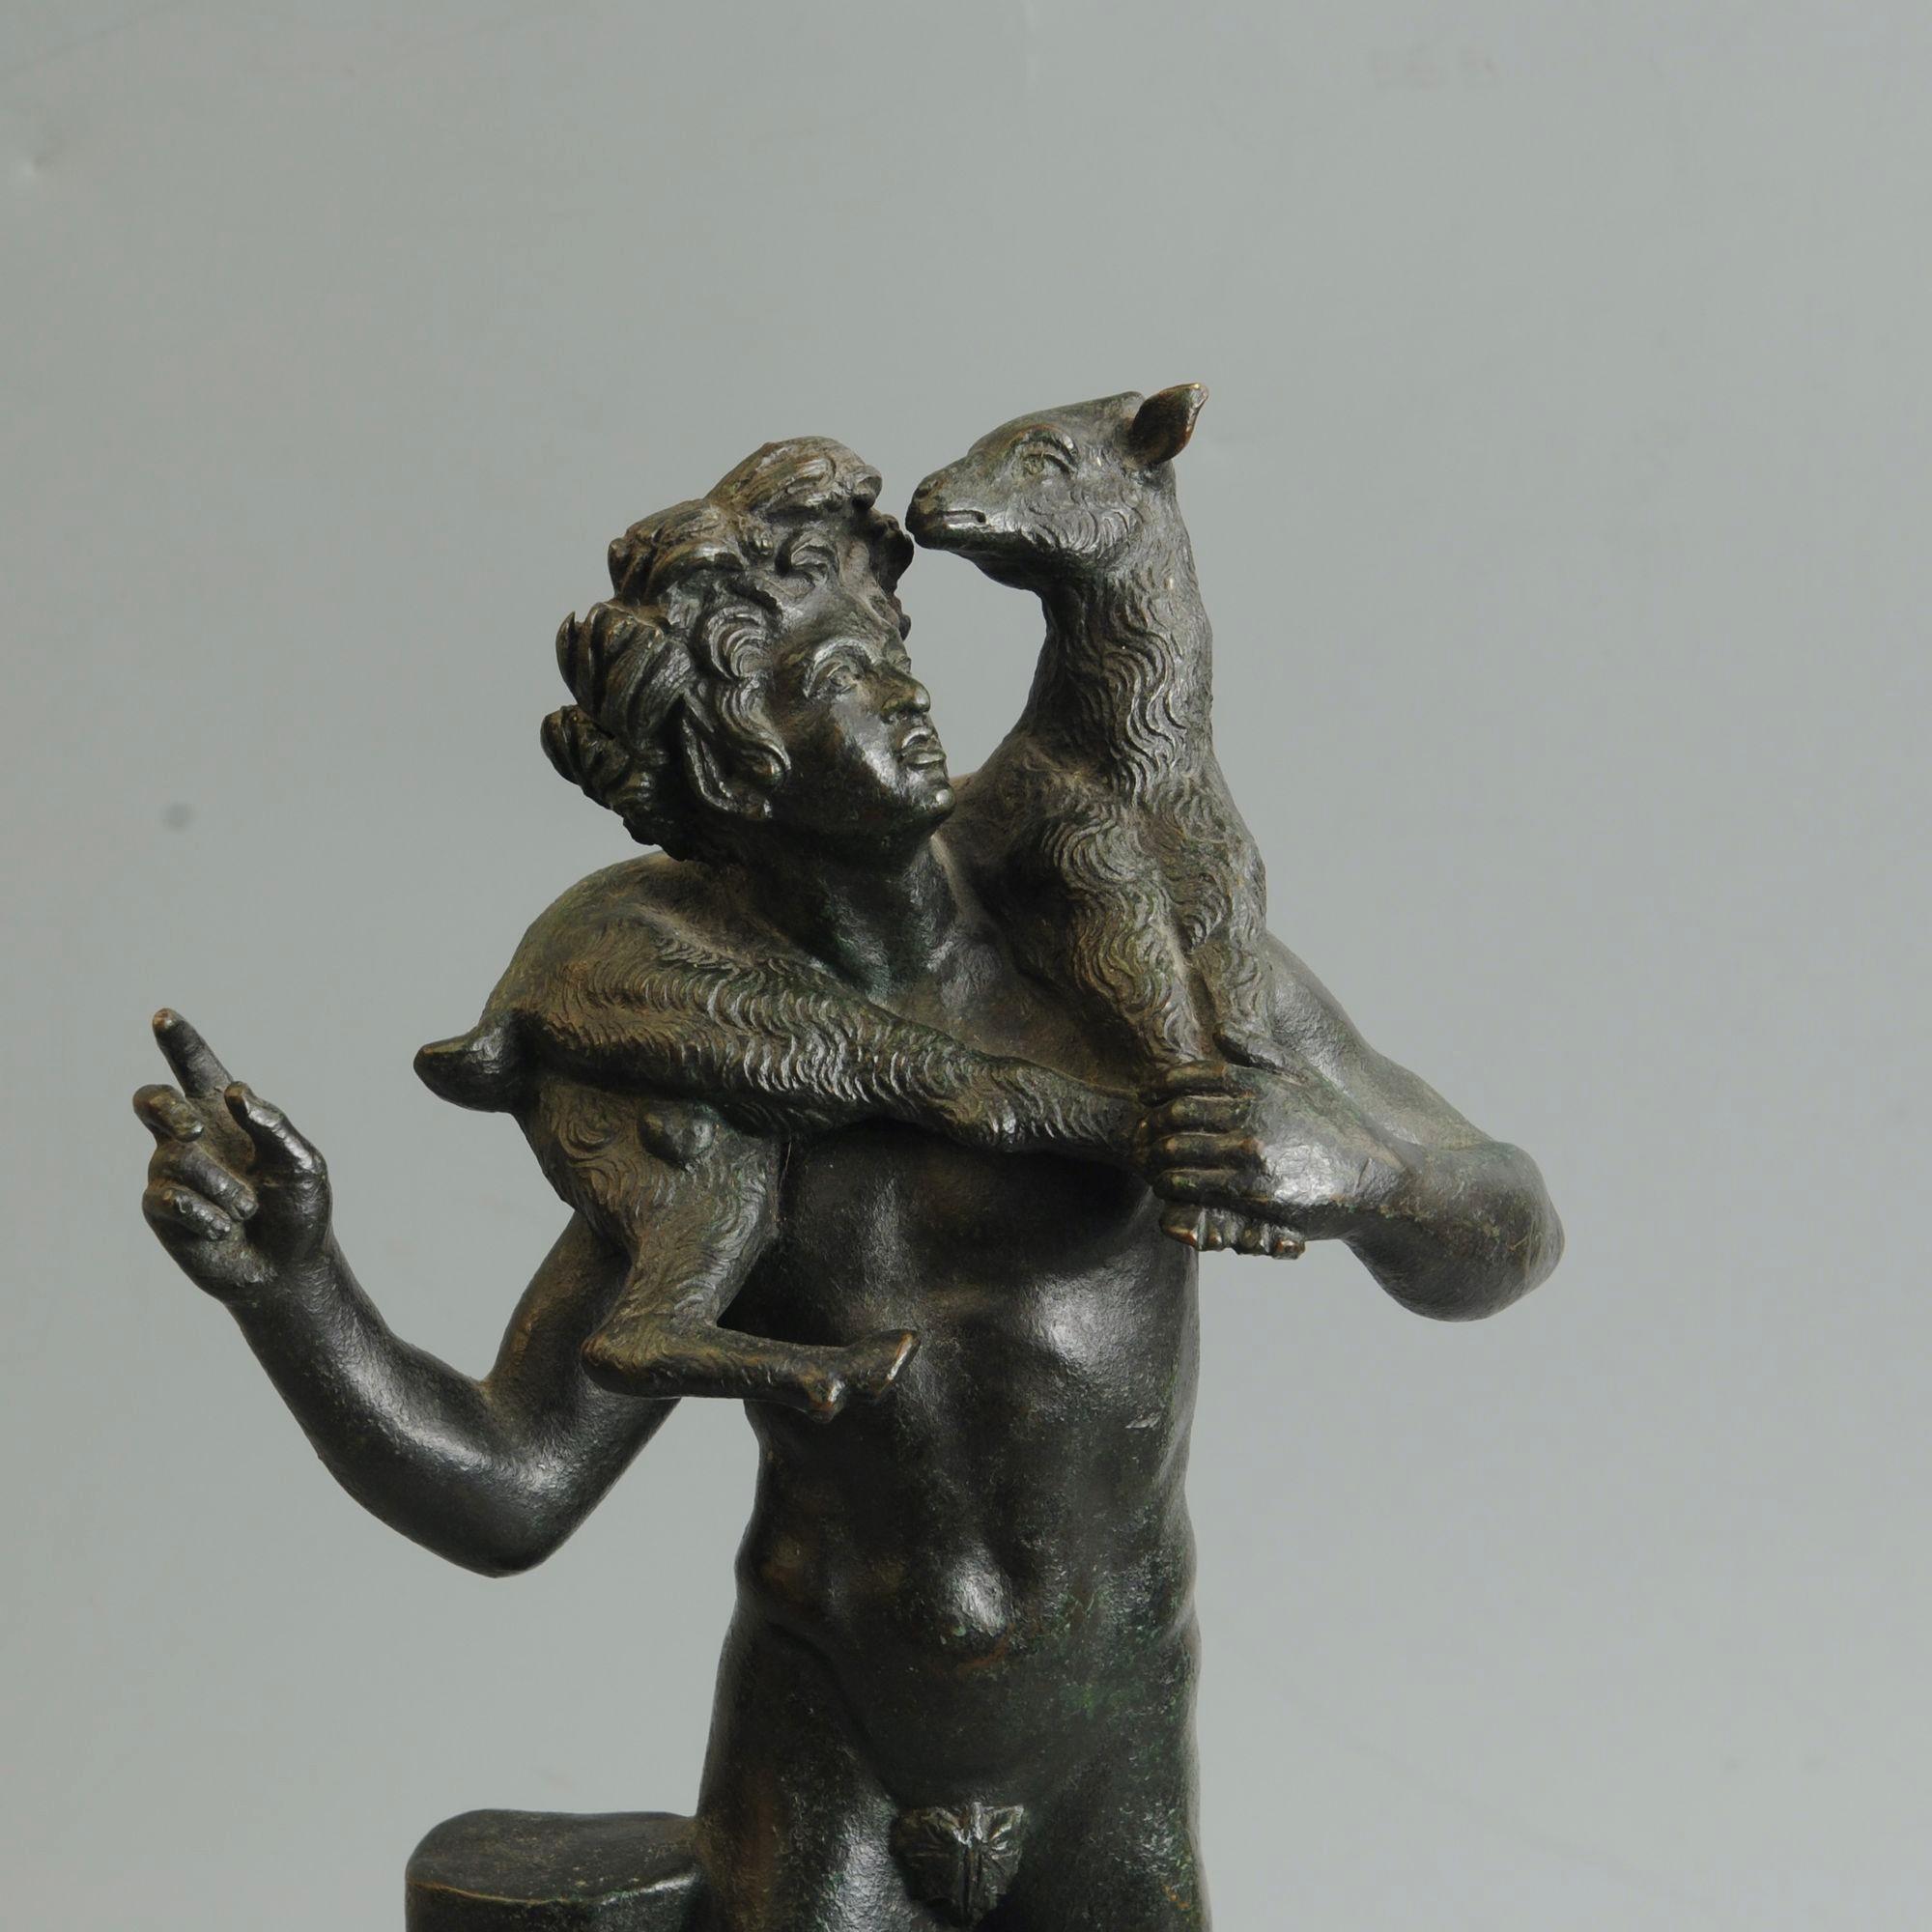 A 19th century Italian grand tour bronze figure of Bacchus with a goat over his shoulders
Circa 1890